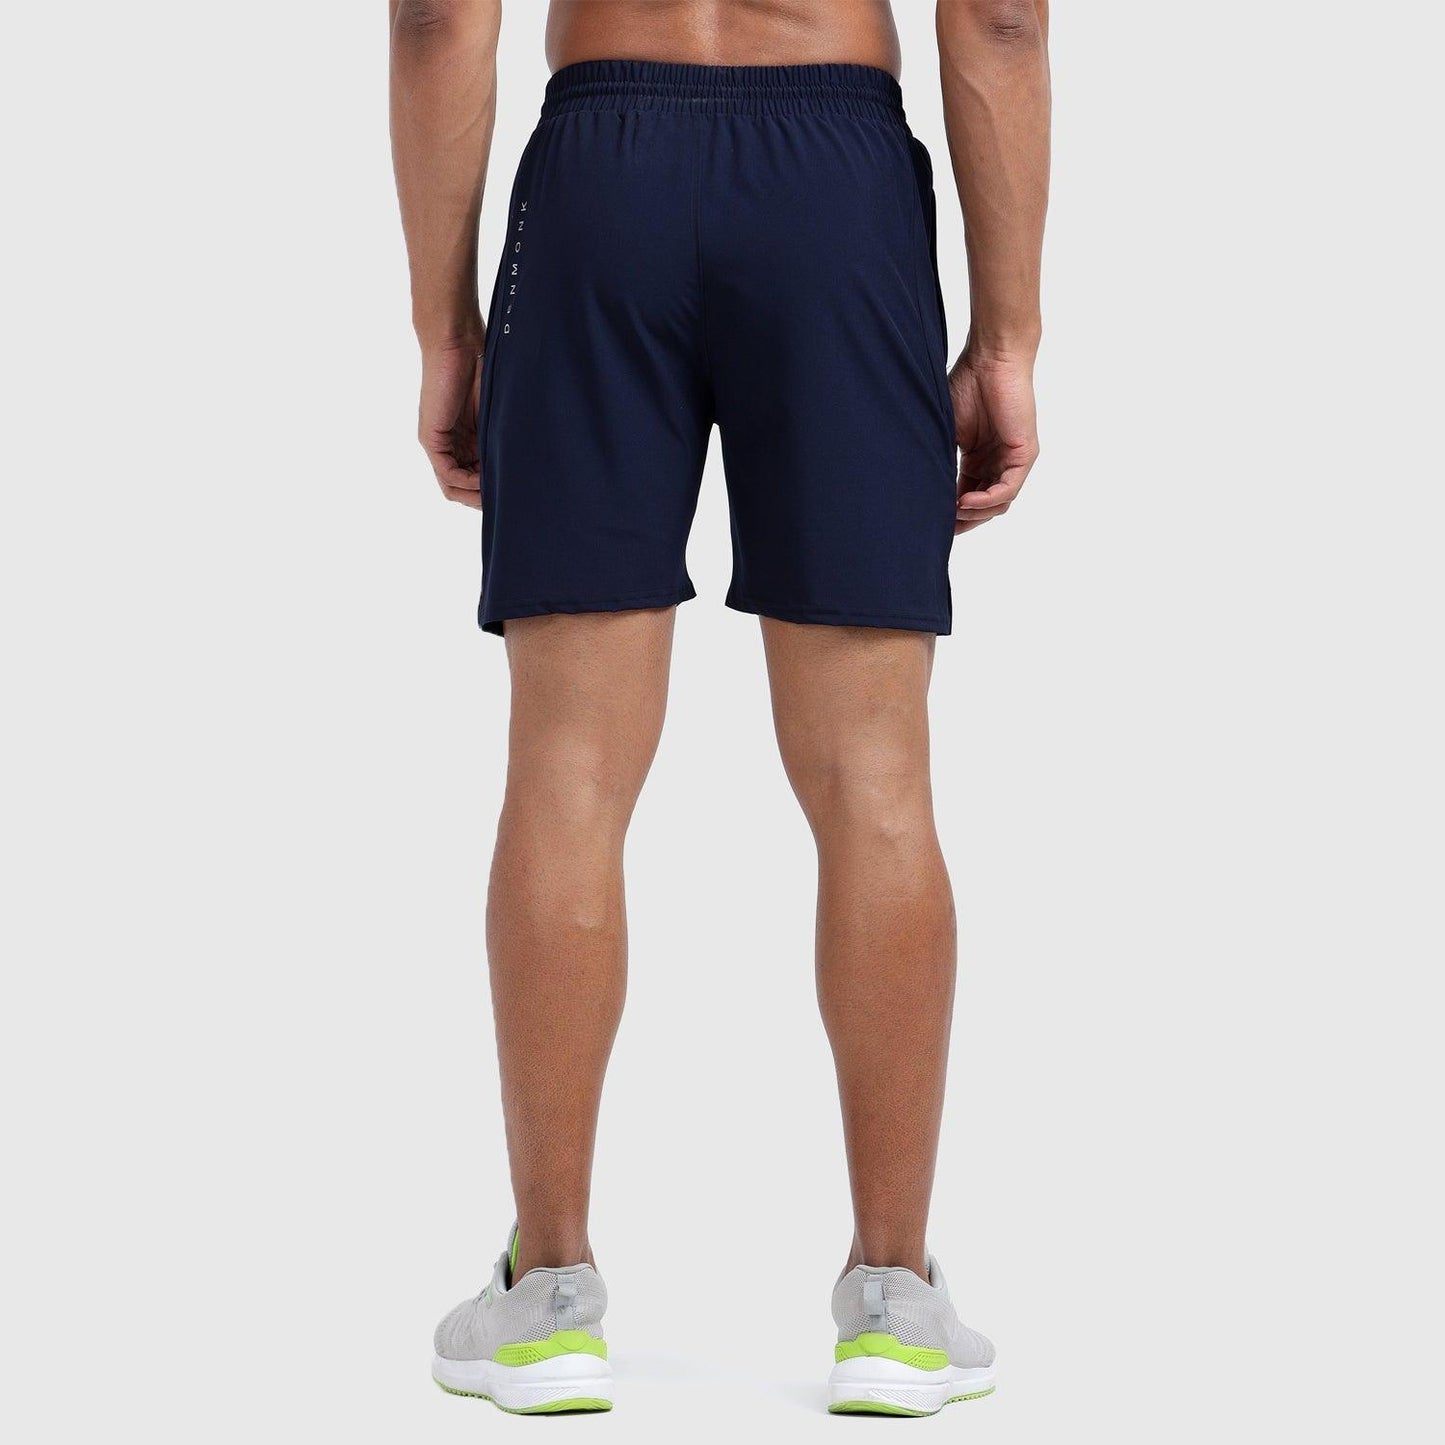 Denmonk's fashionable Coastline Comfort midnight navy shorts for men will boost your level of gym fitness.